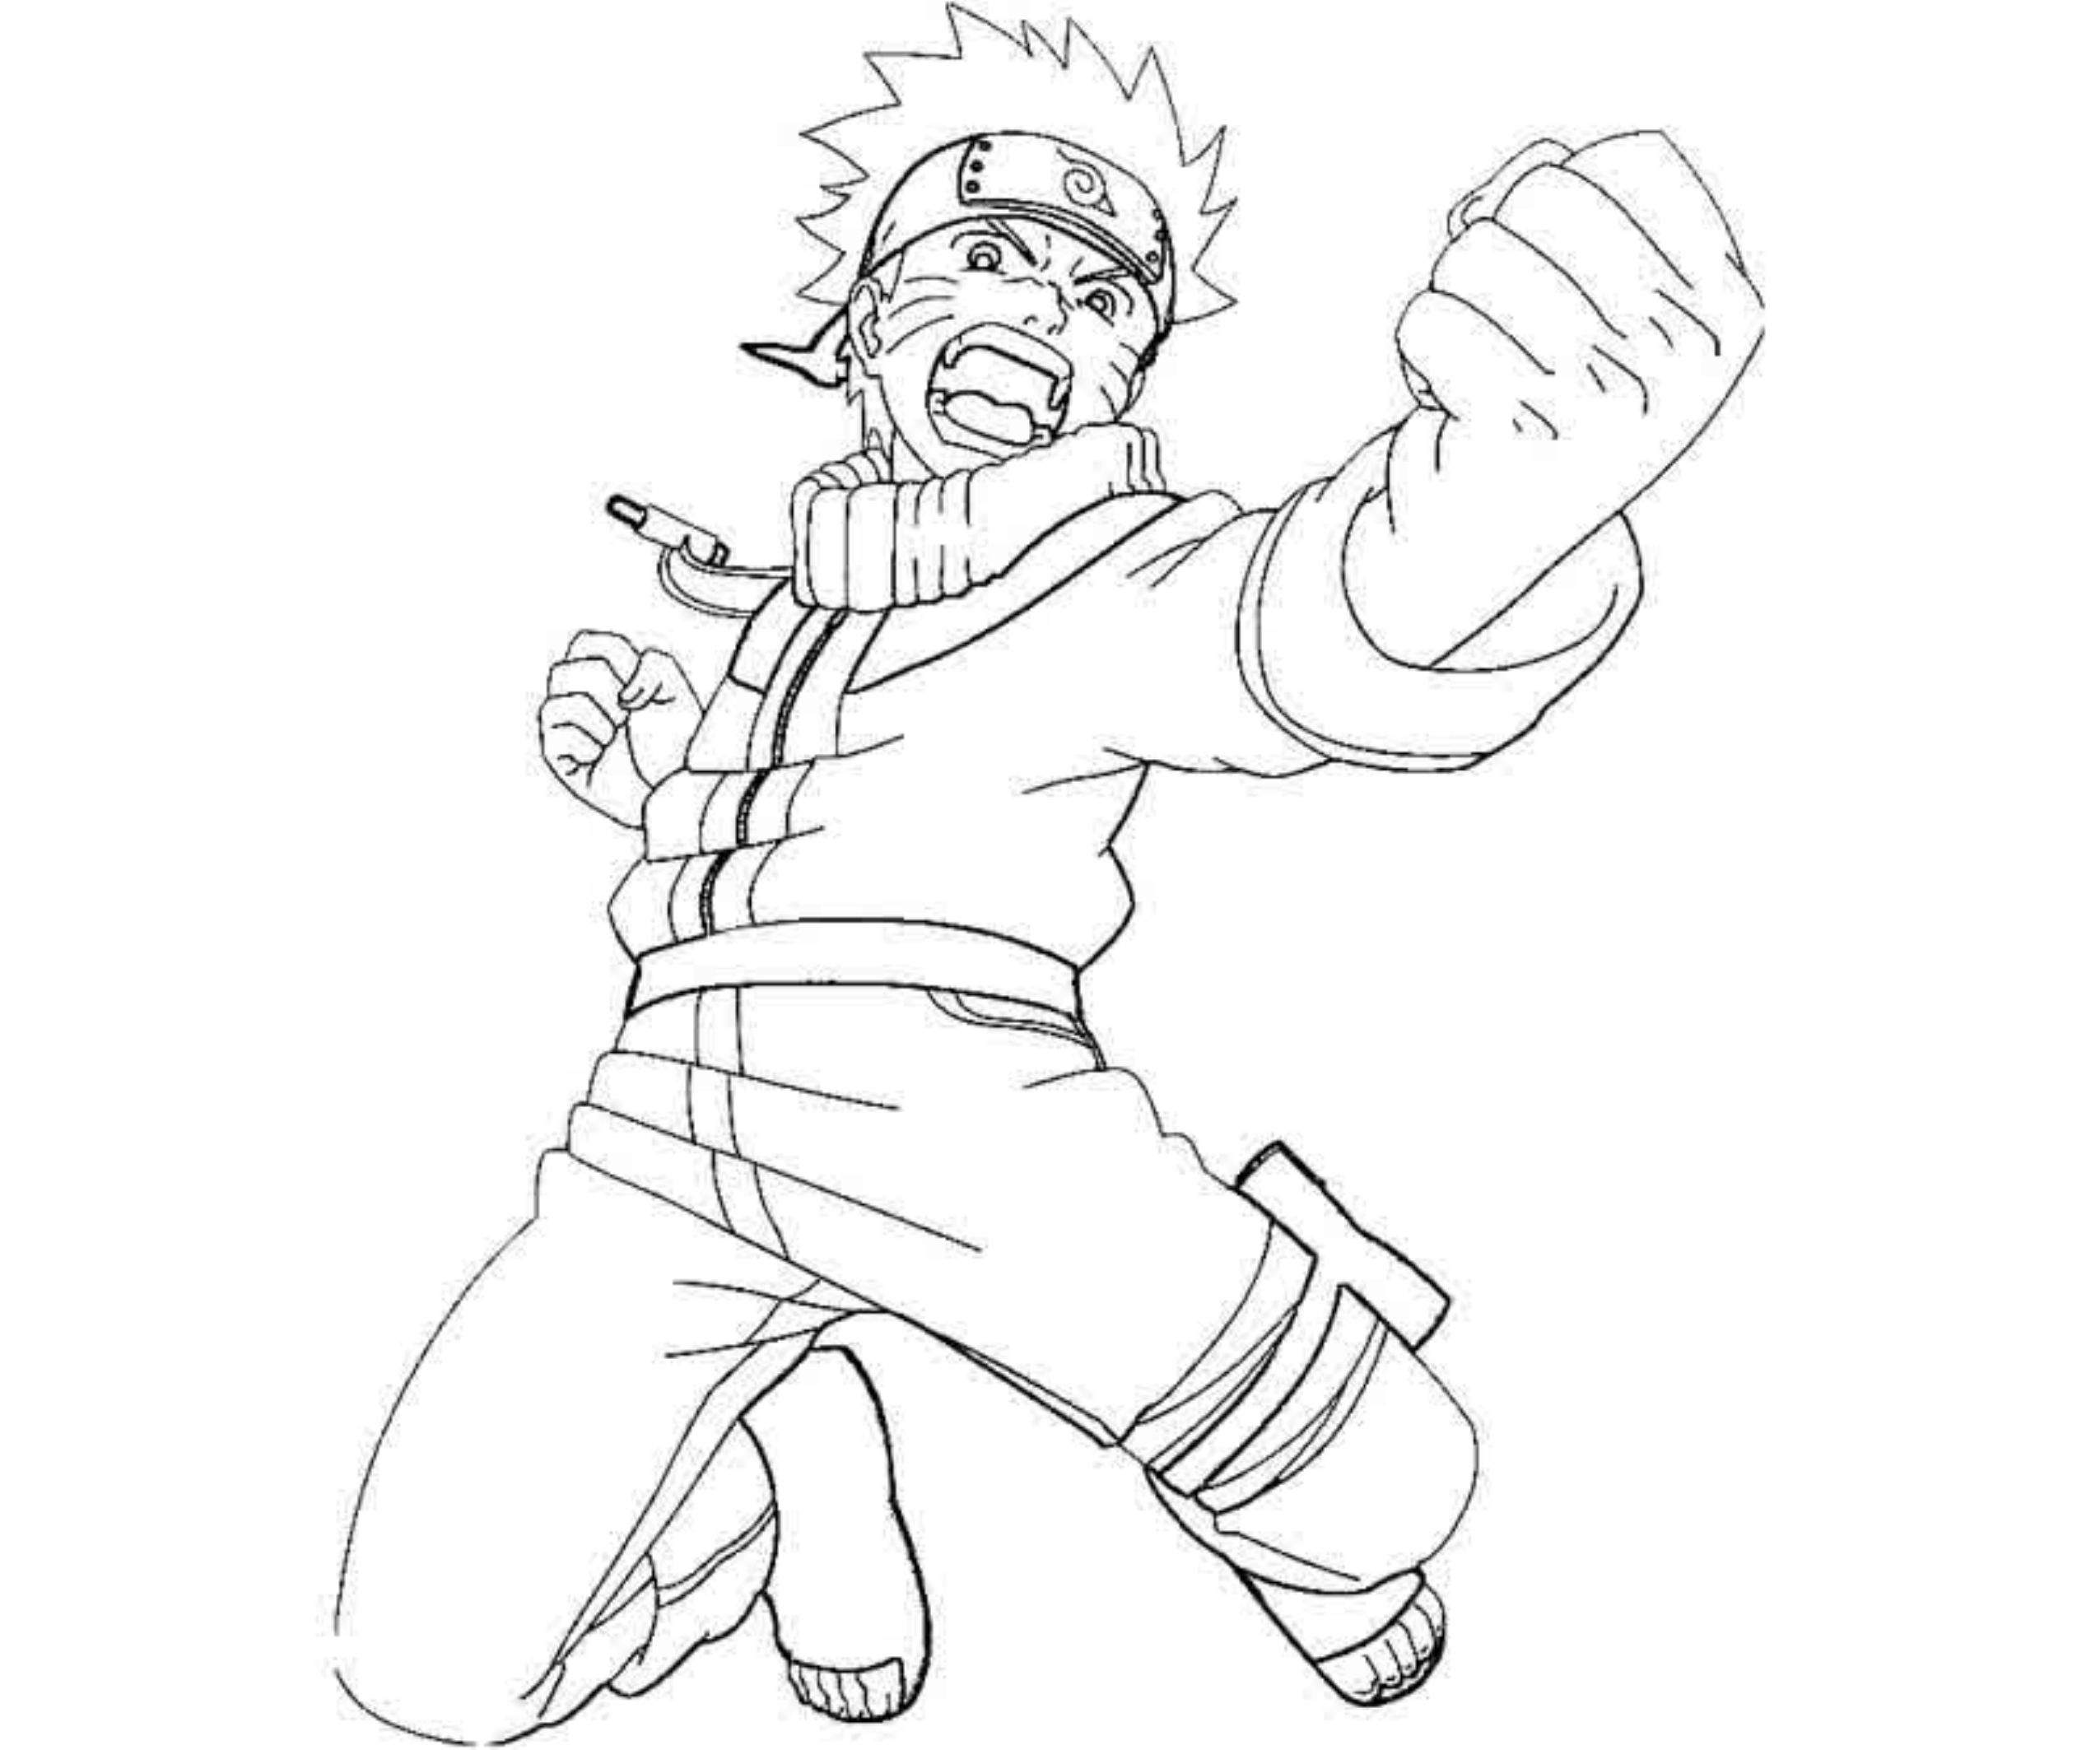 coloring pages of naruto shippuden characters - Printable Kids ...